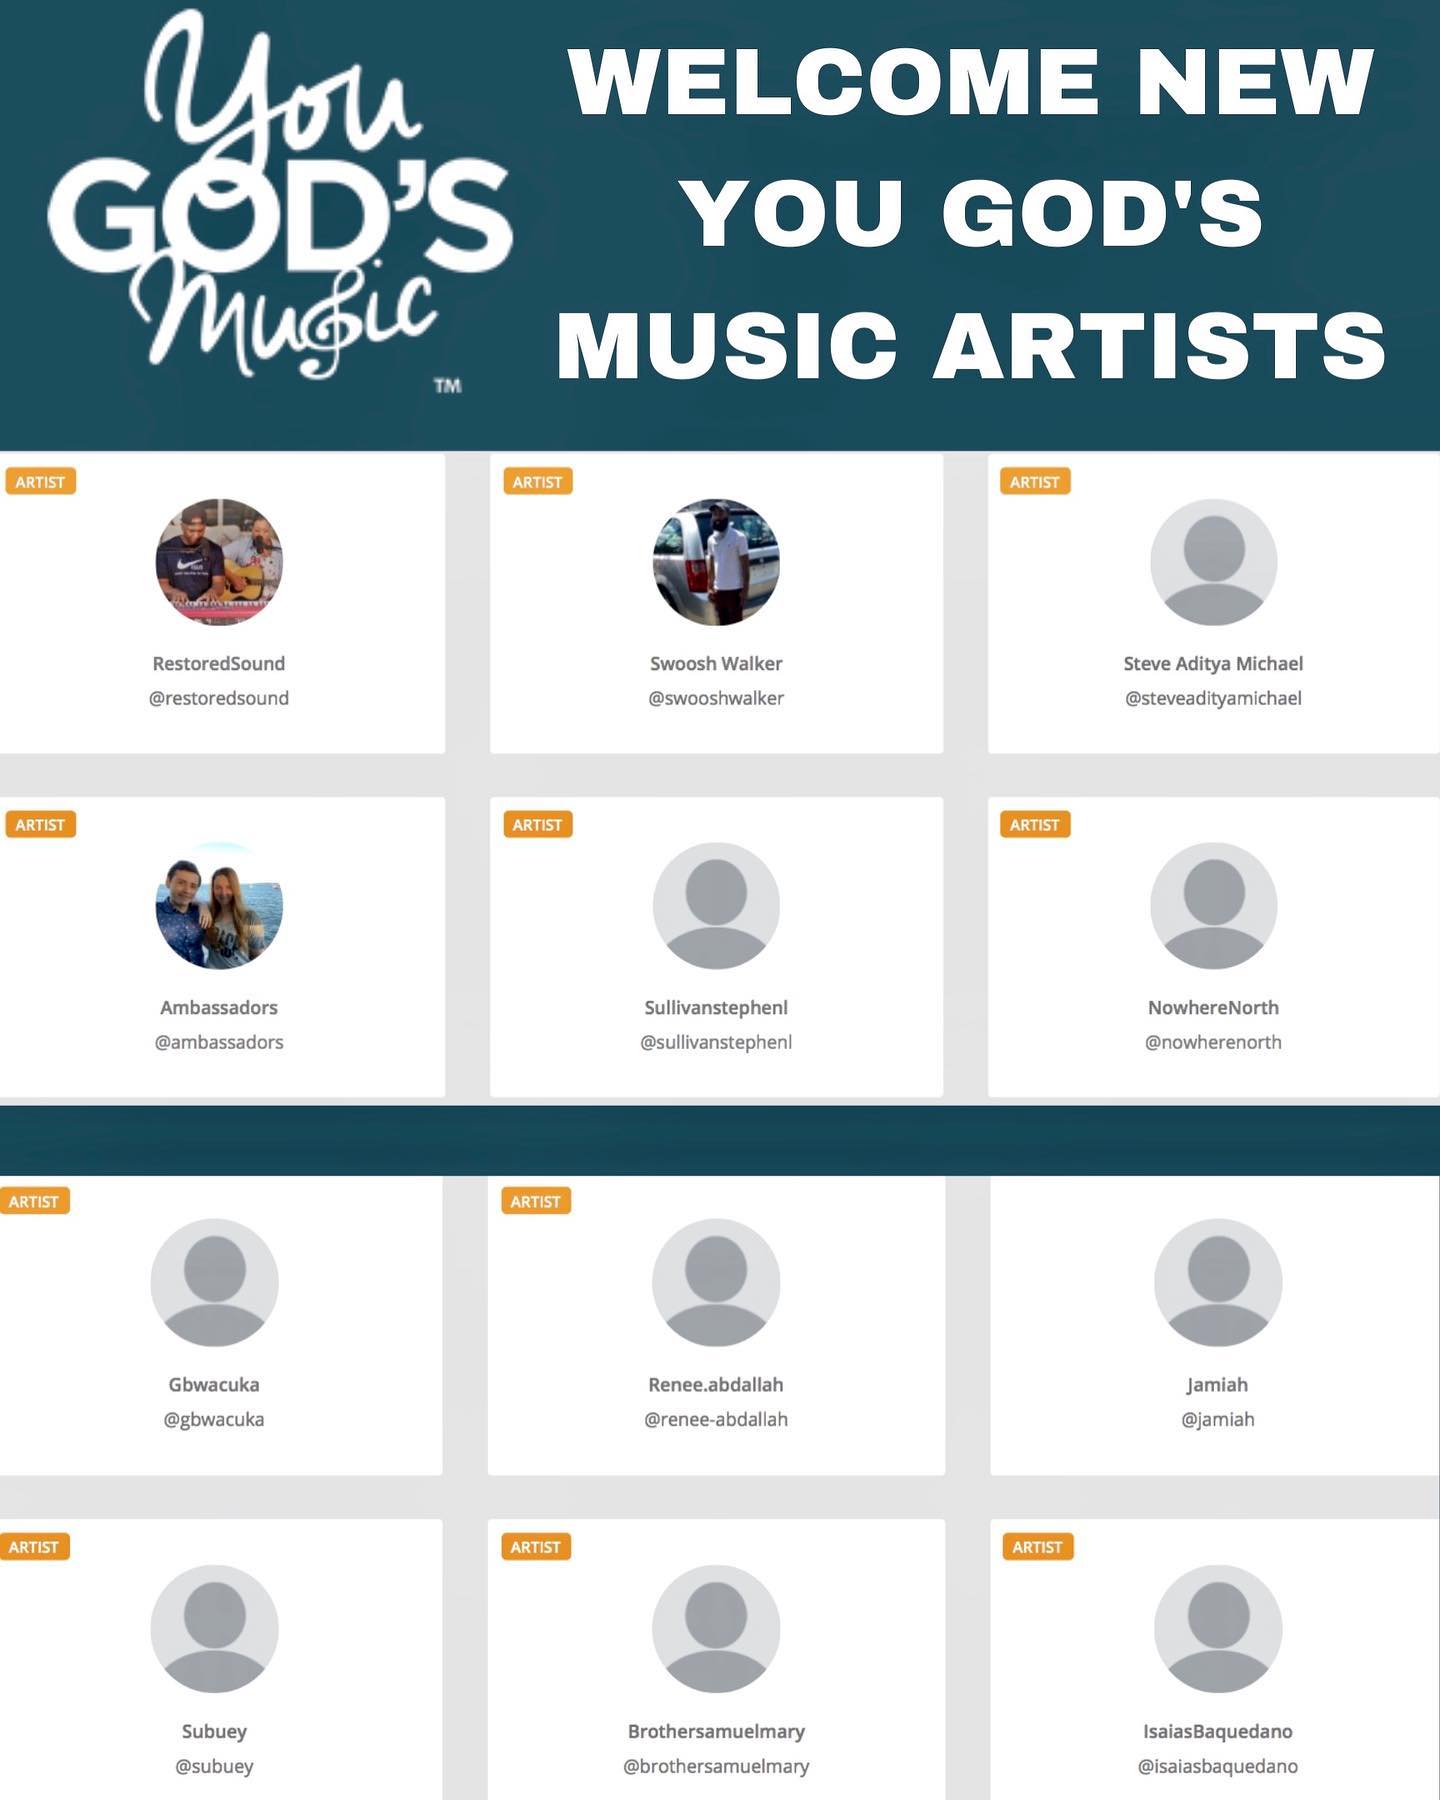 You God's Music would like to welcome some new artists into our community!